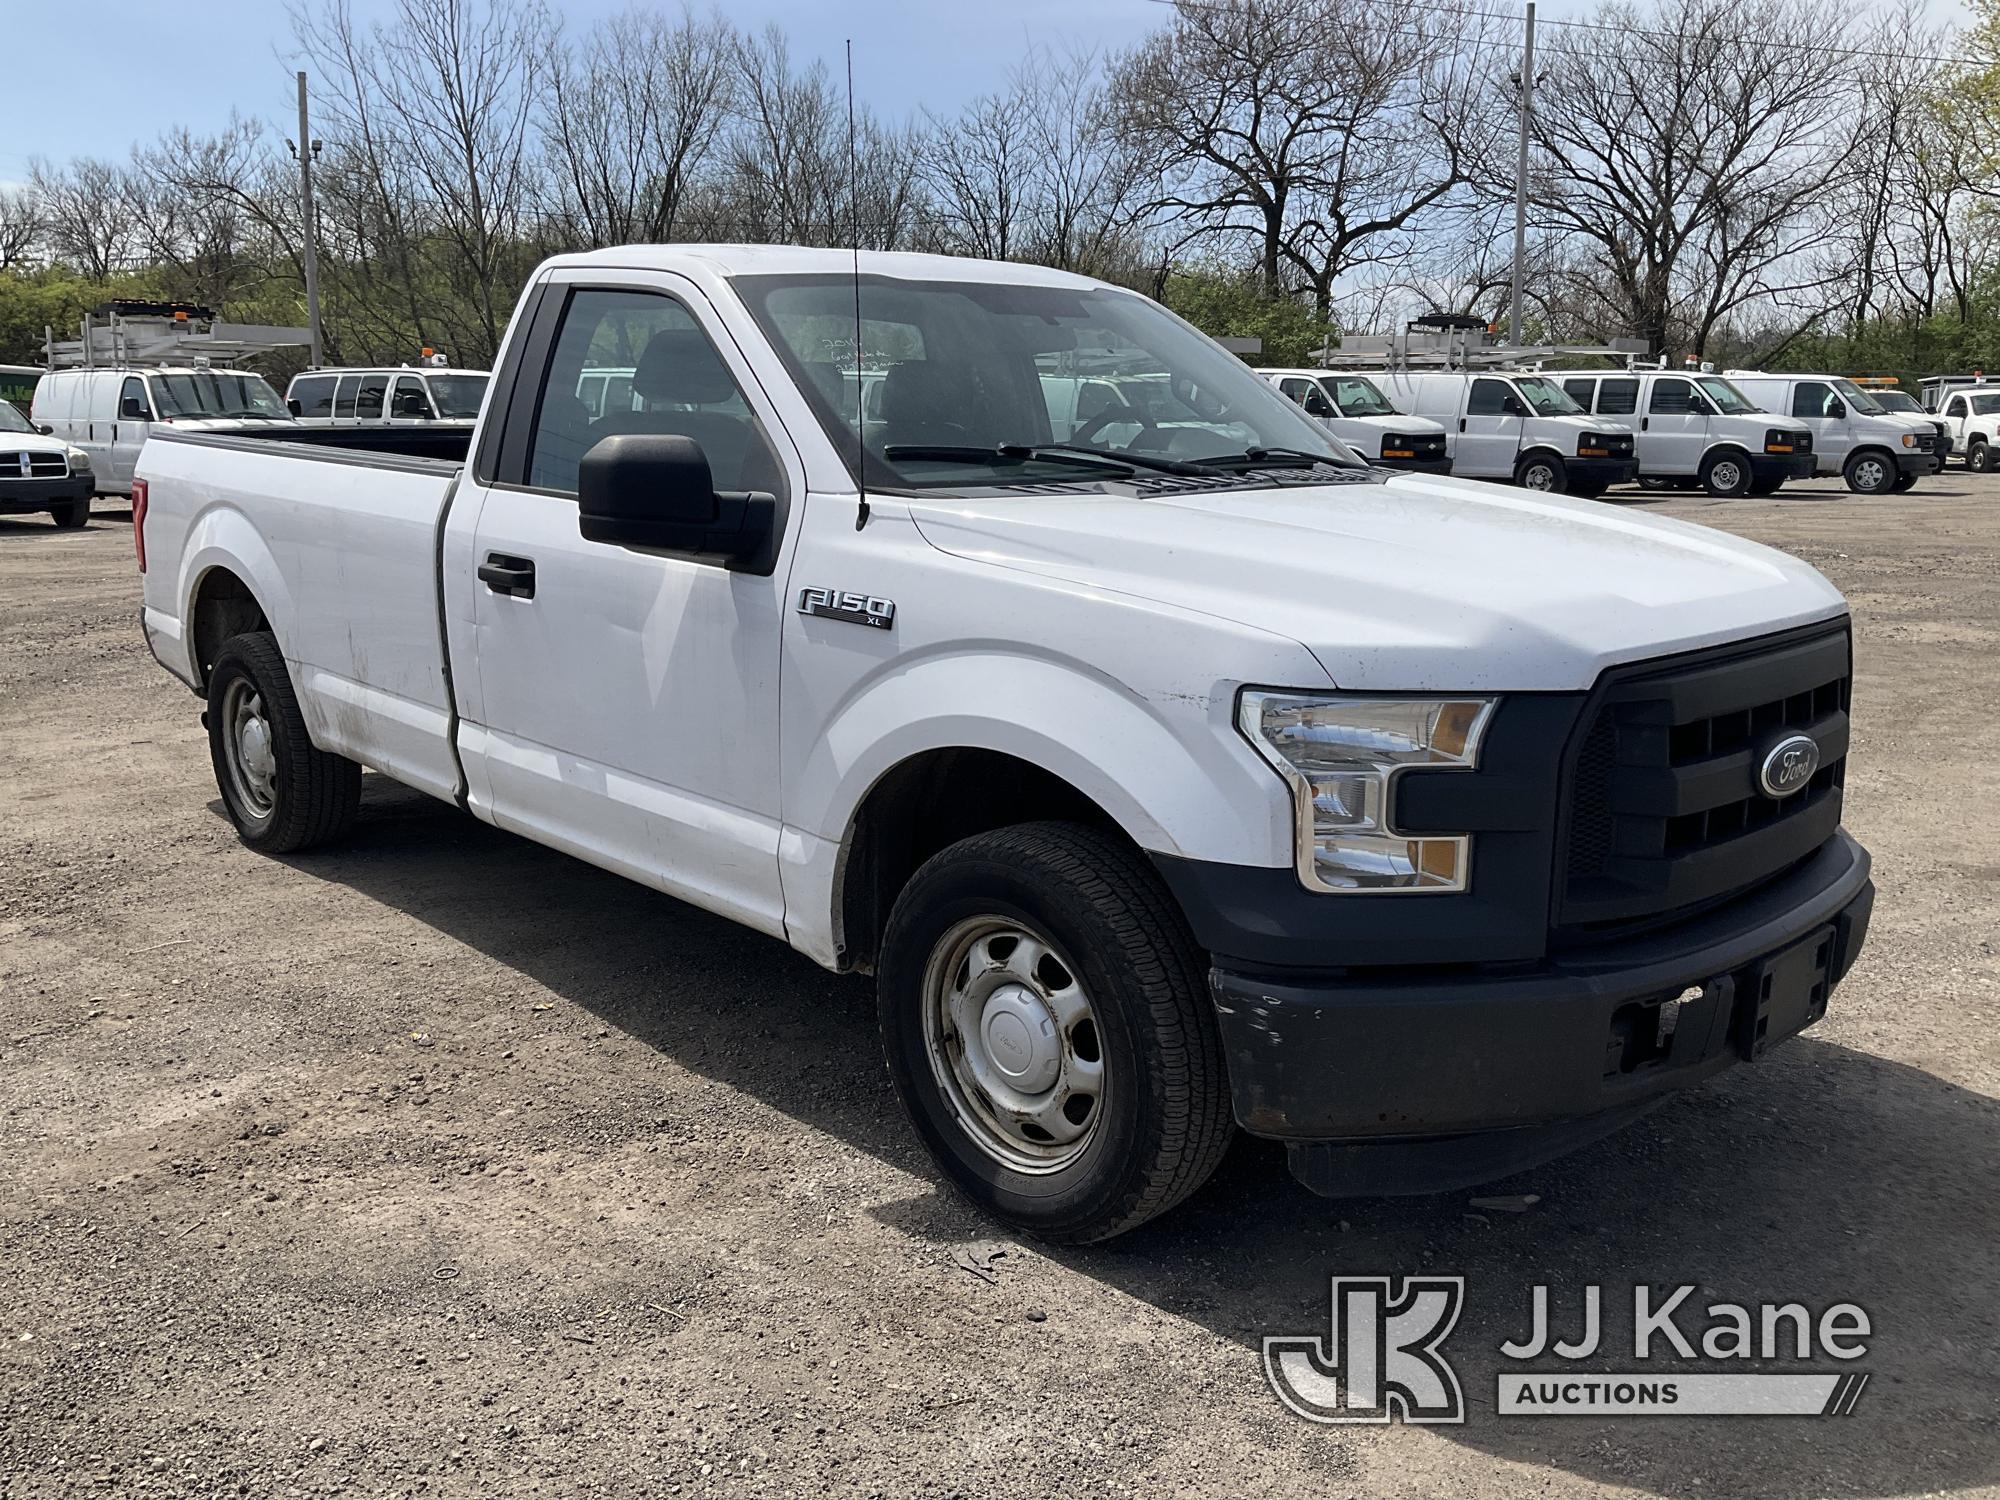 (Plymouth Meeting, PA) 2016 Ford F150 Pickup Truck Runs & Moves, Check Engine Light On, Body & Rust